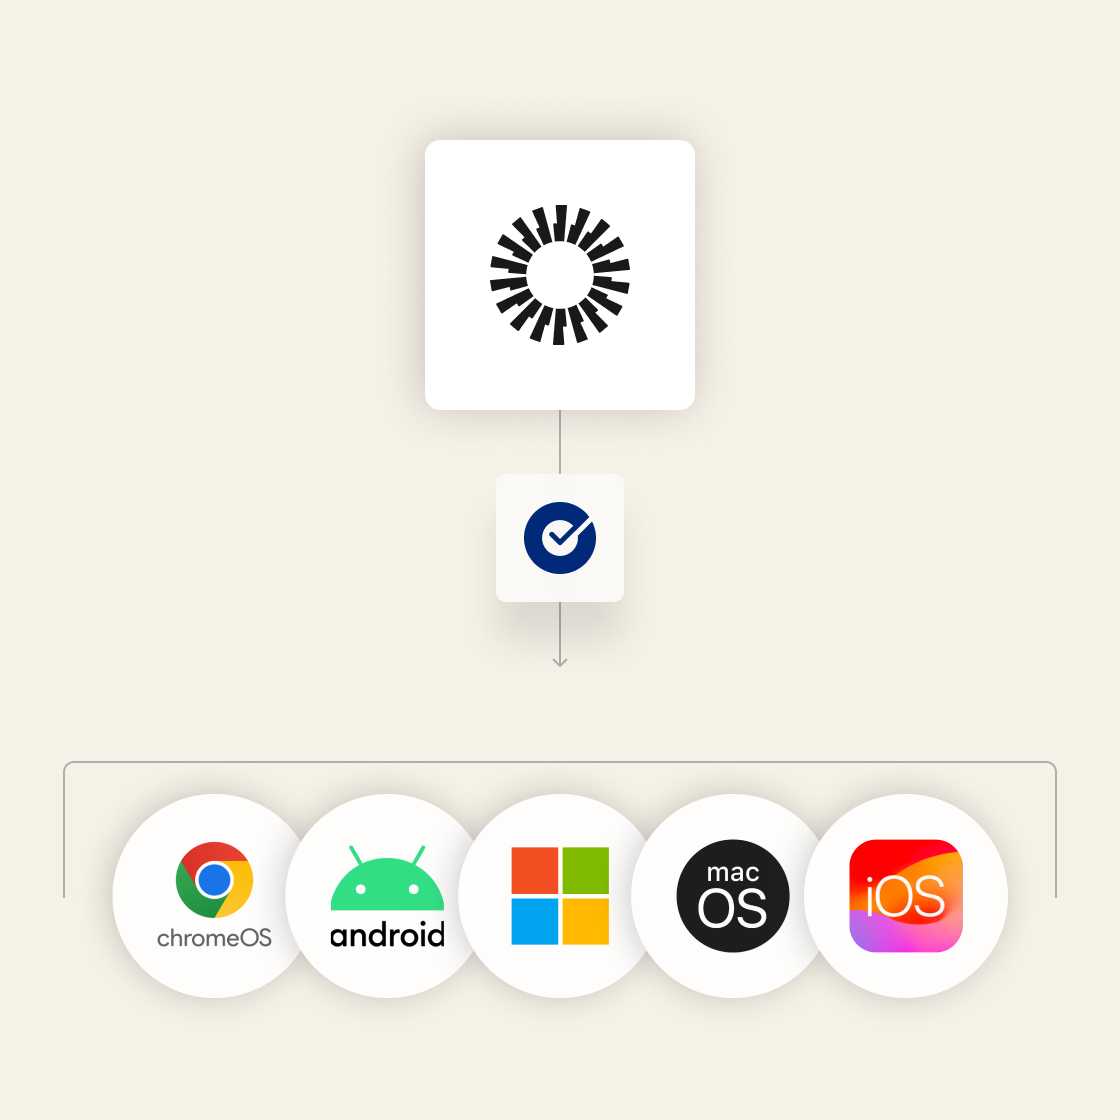 Image of Okta icon pointing towards and SSO icon, leading to various managed and unmanaged devices.